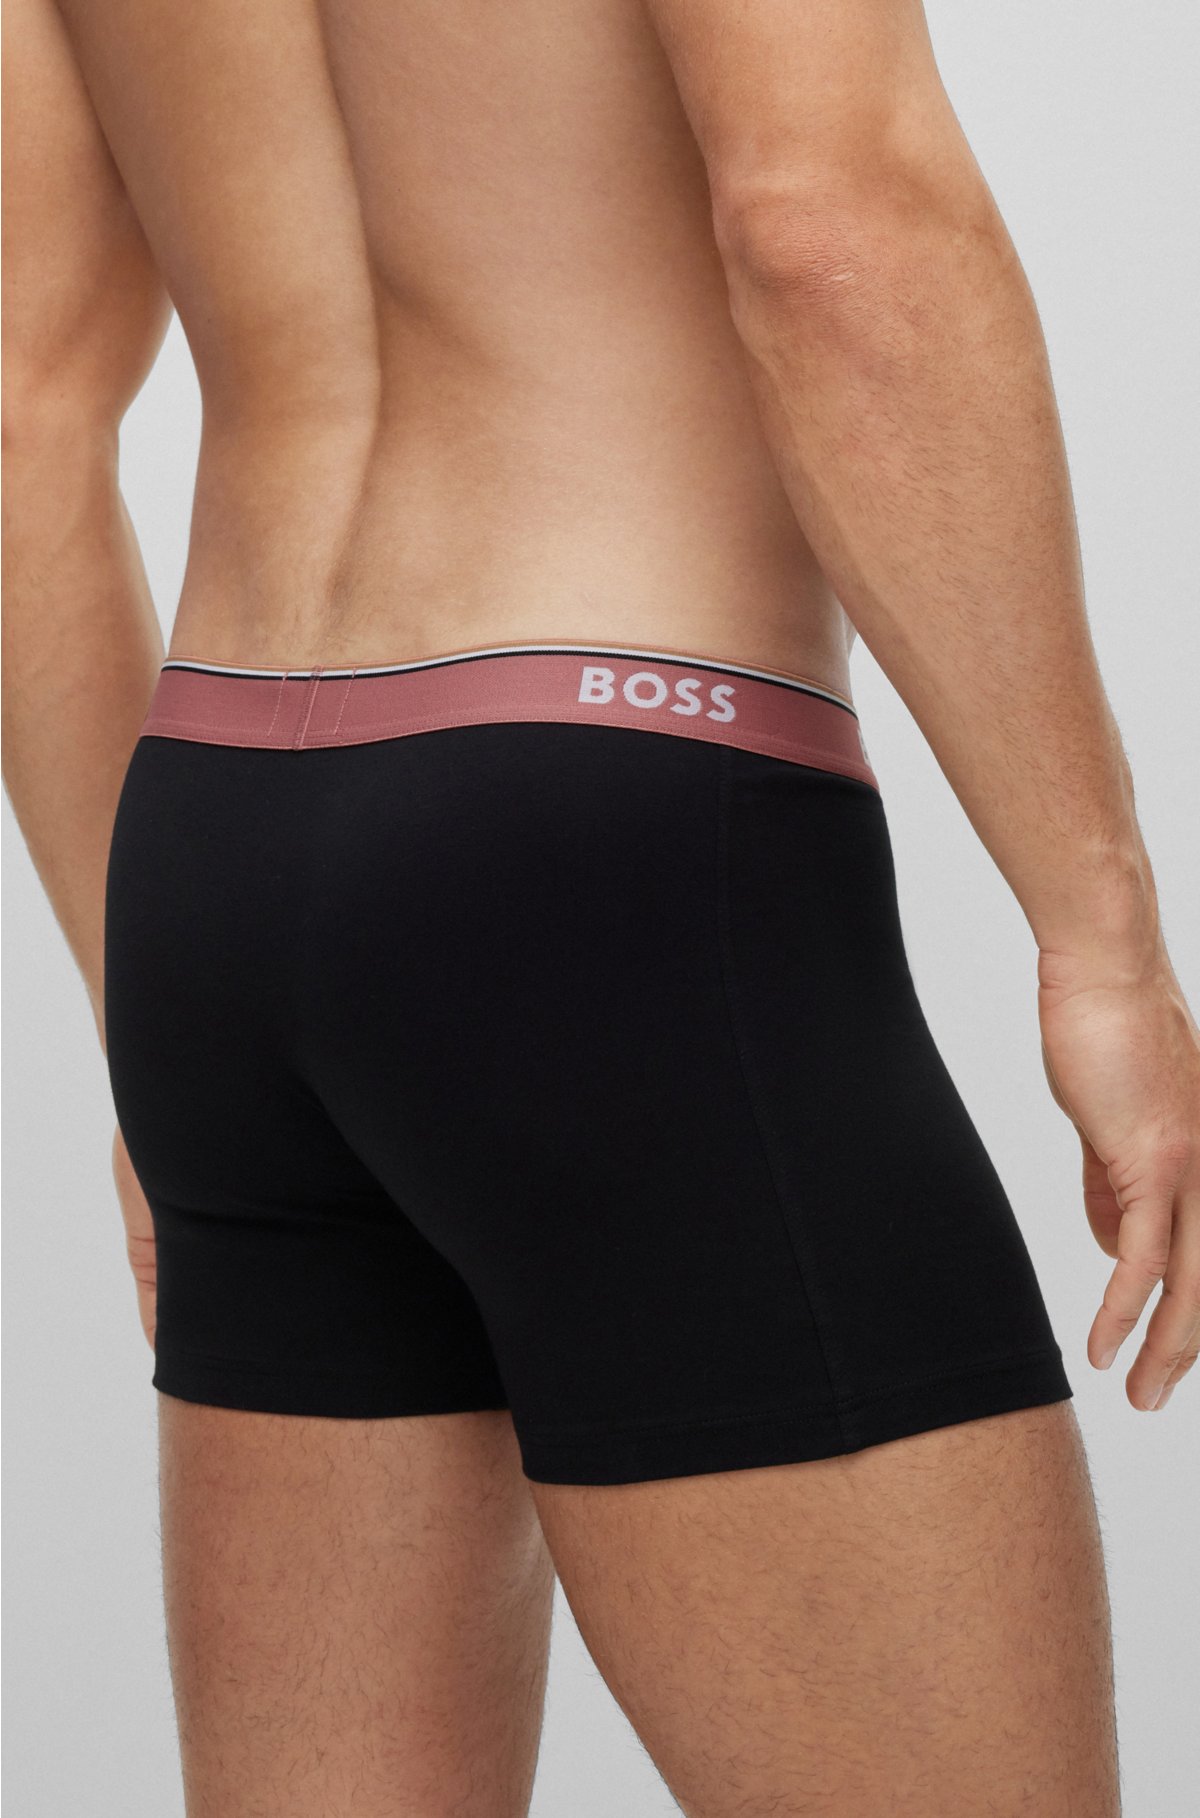 BOSS - Three-pack logo boxer waistbands briefs with of